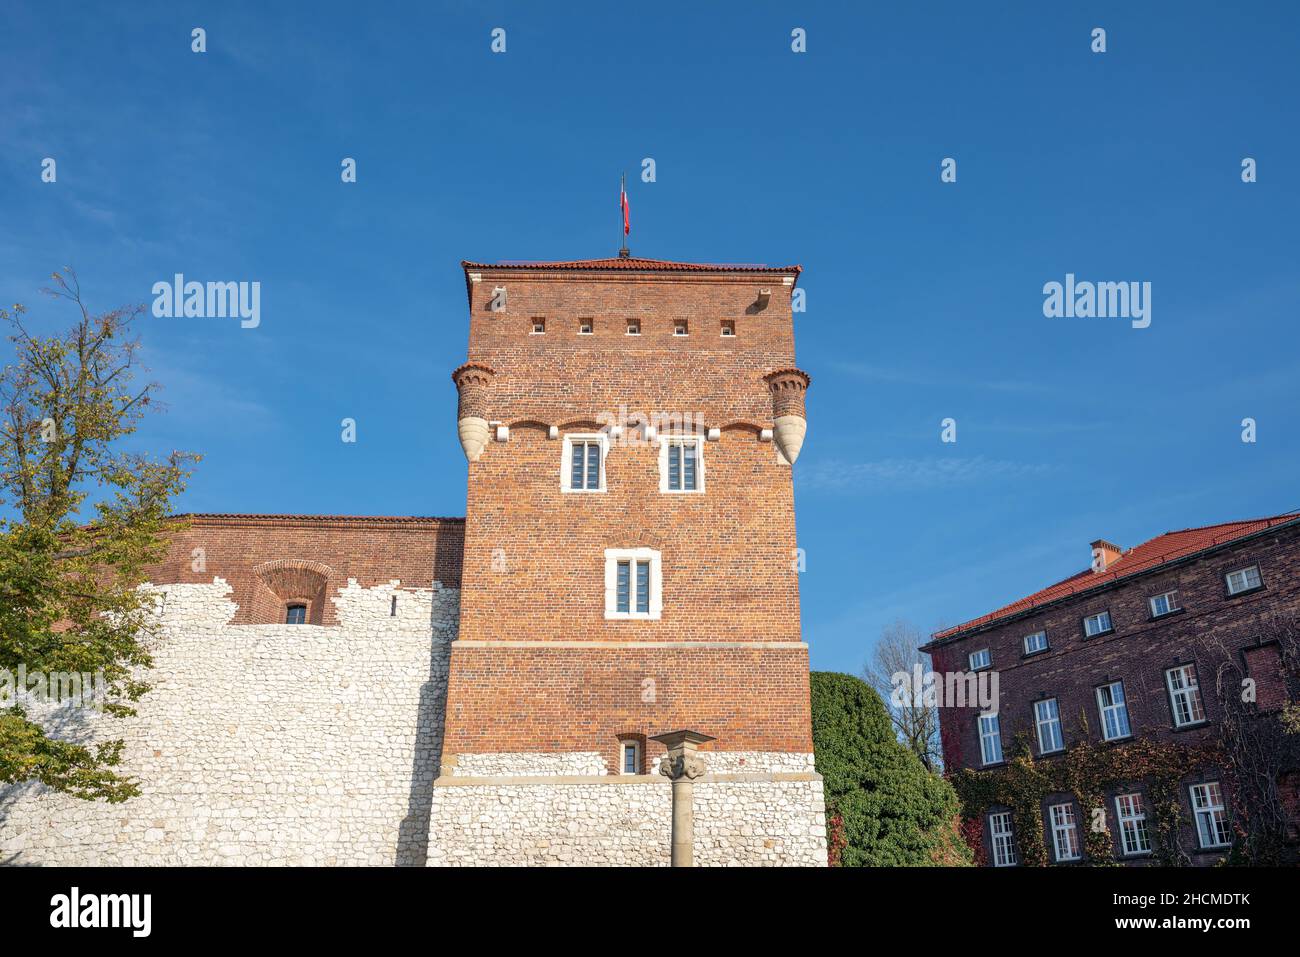 Wawel Castle and Thieves Tower - Krakow, Poland Stock Photo